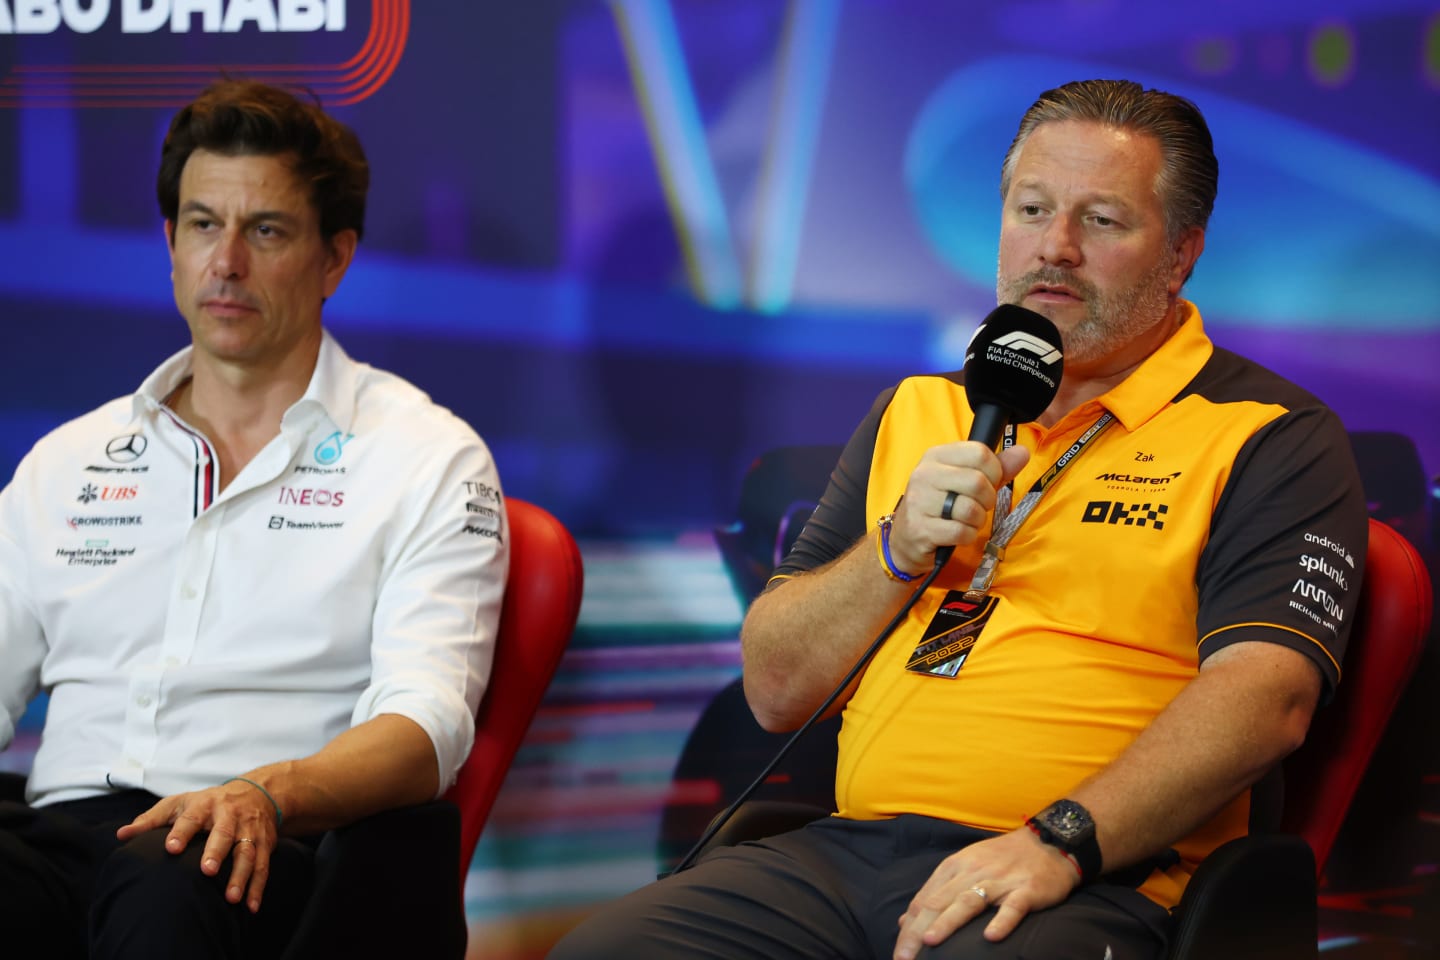 ABU DHABI, UNITED ARAB EMIRATES - NOVEMBER 19: McLaren Chief Executive Officer Zak Brown and Mercedes GP Executive Director Toto Wolff attend the Team Principals Press Conference prior to final practice ahead of the F1 Grand Prix of Abu Dhabi at Yas Marina Circuit on November 19, 2022 in Abu Dhabi, United Arab Emirates. (Photo by Bryn Lennon/Getty Images)